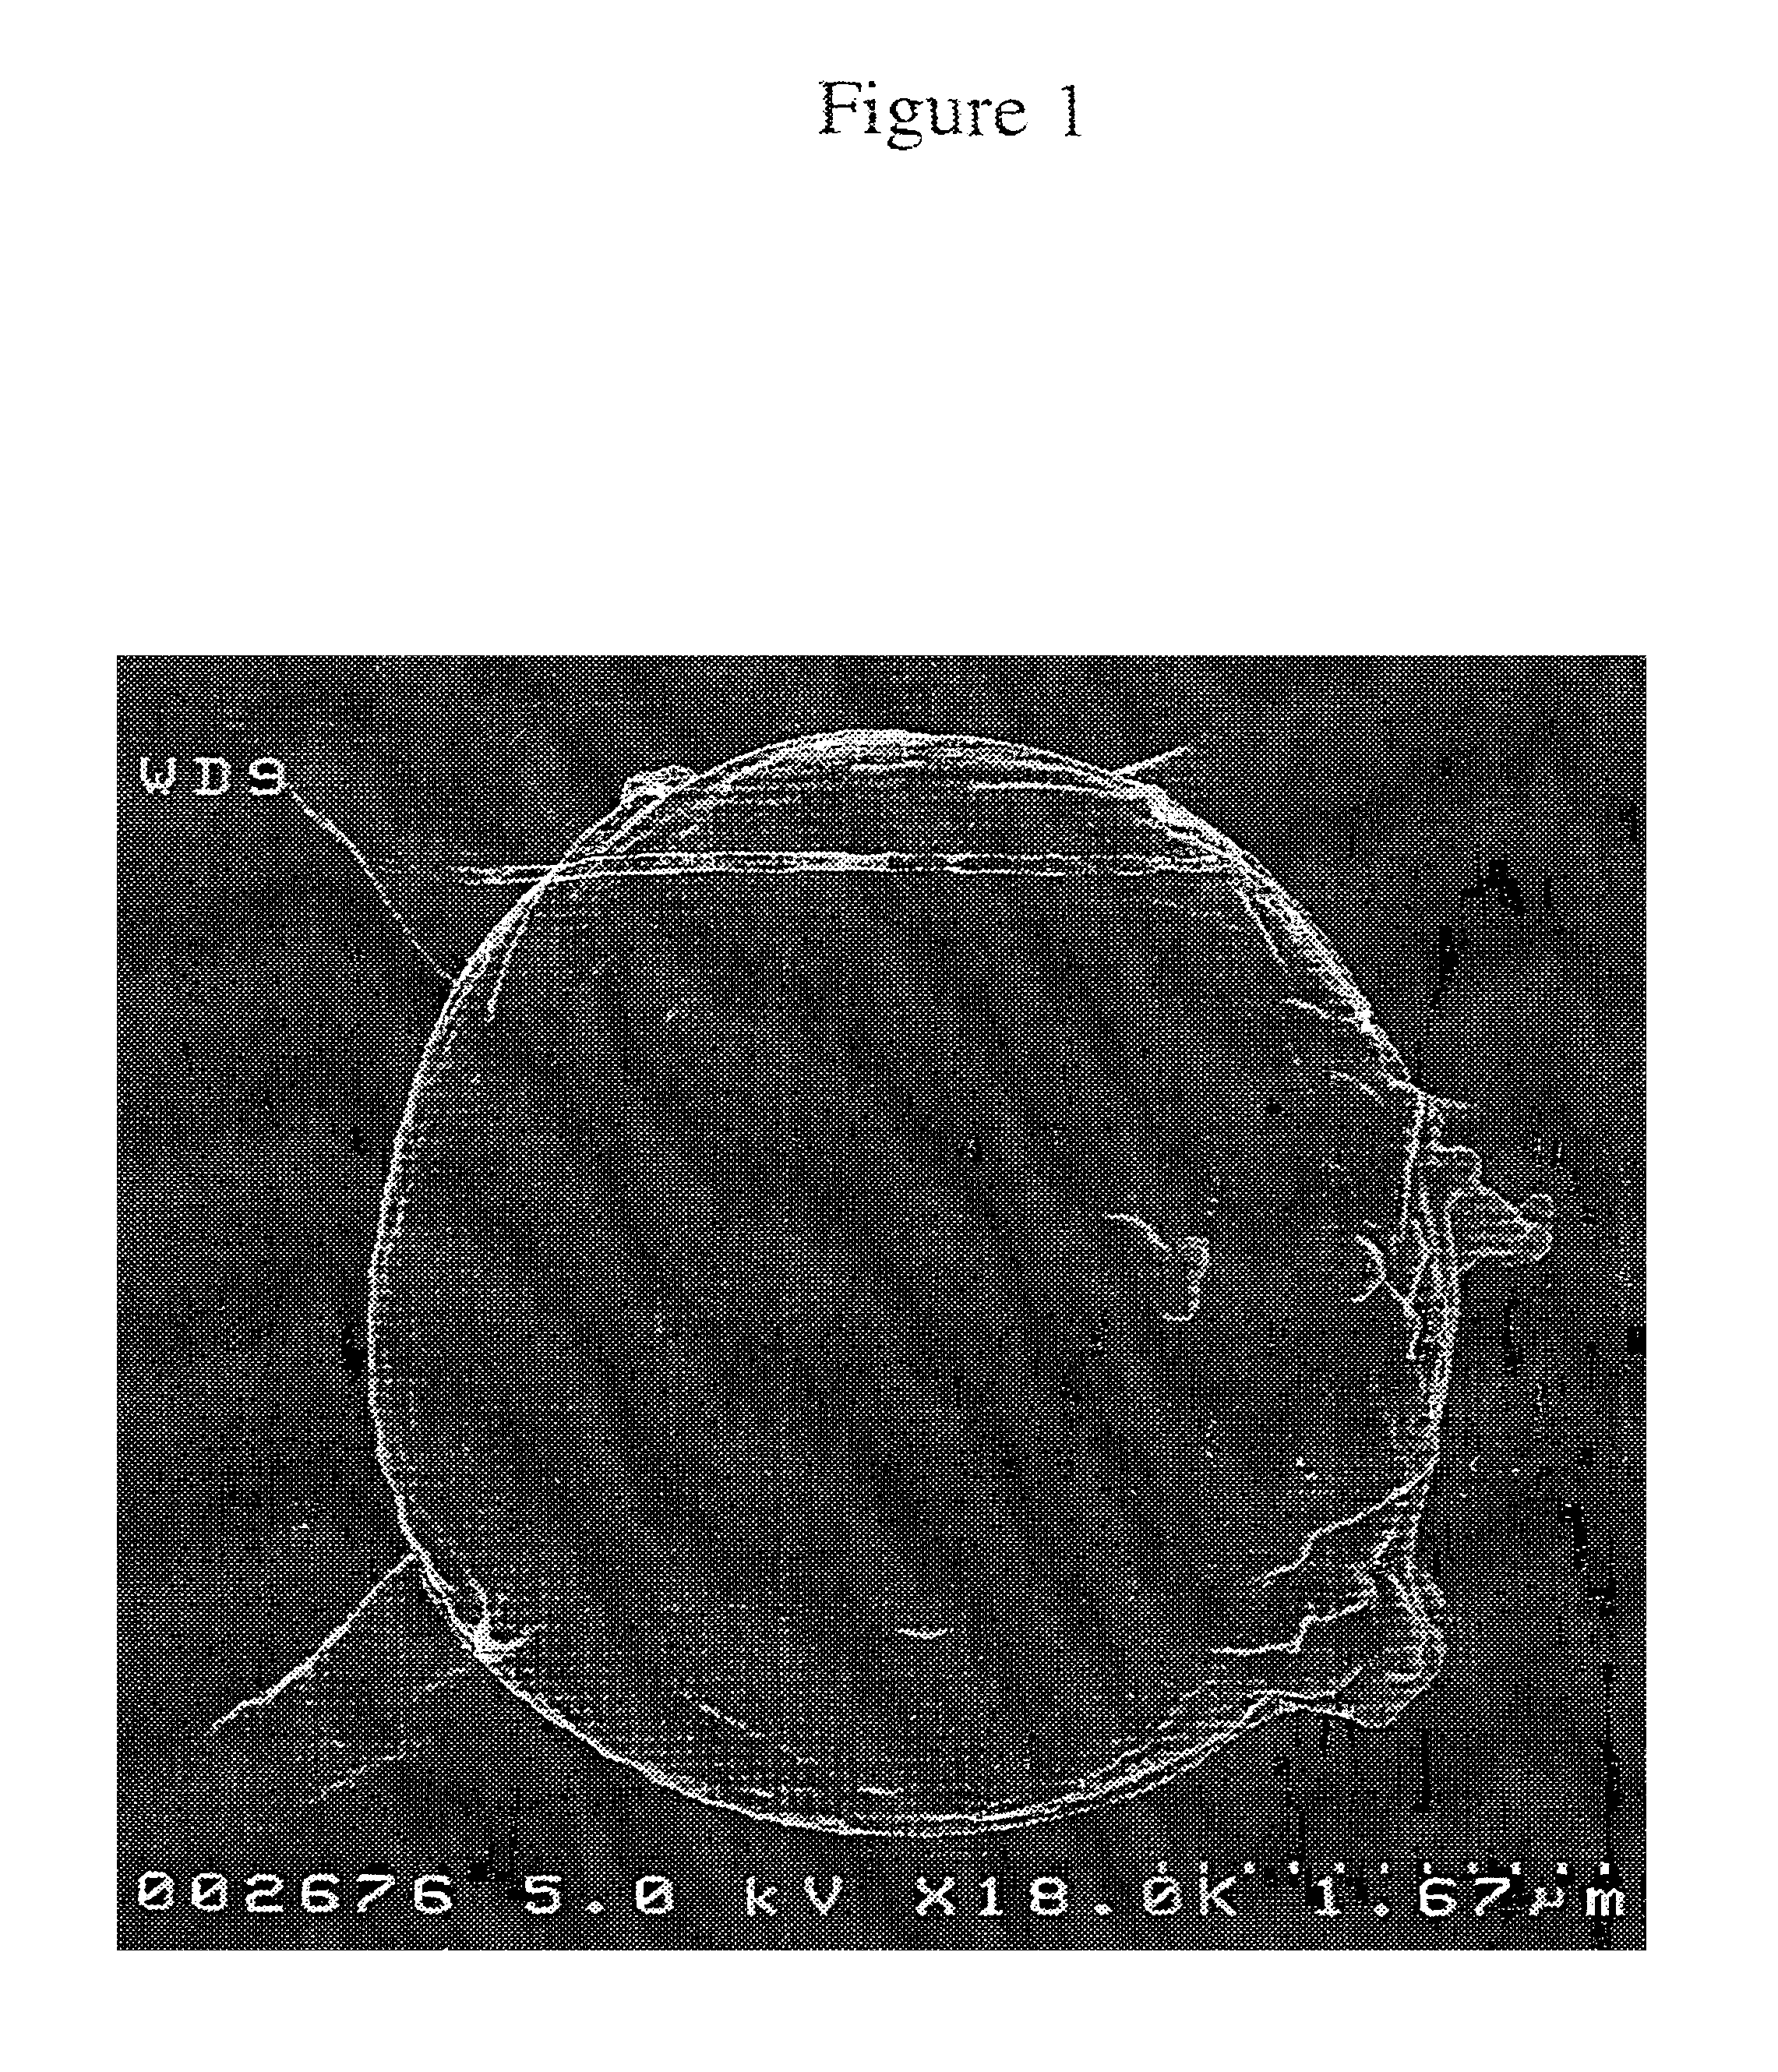 Method of water purification